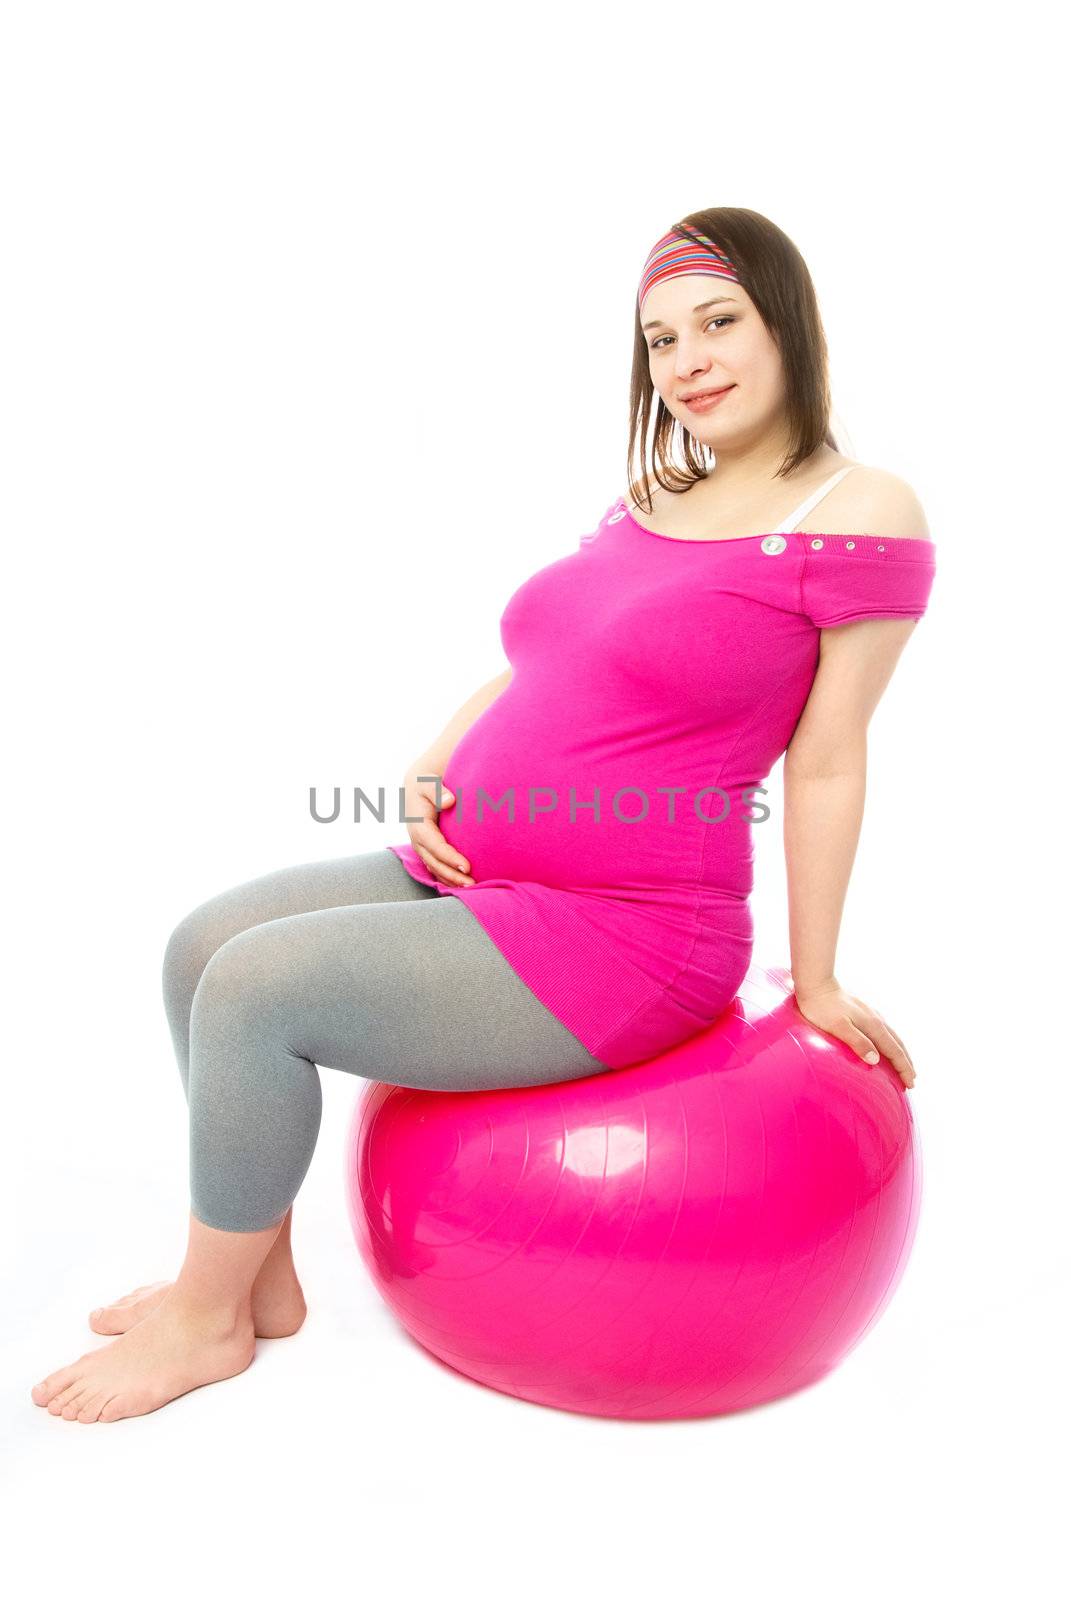 pregnant woman with a fitmess ball by lanak